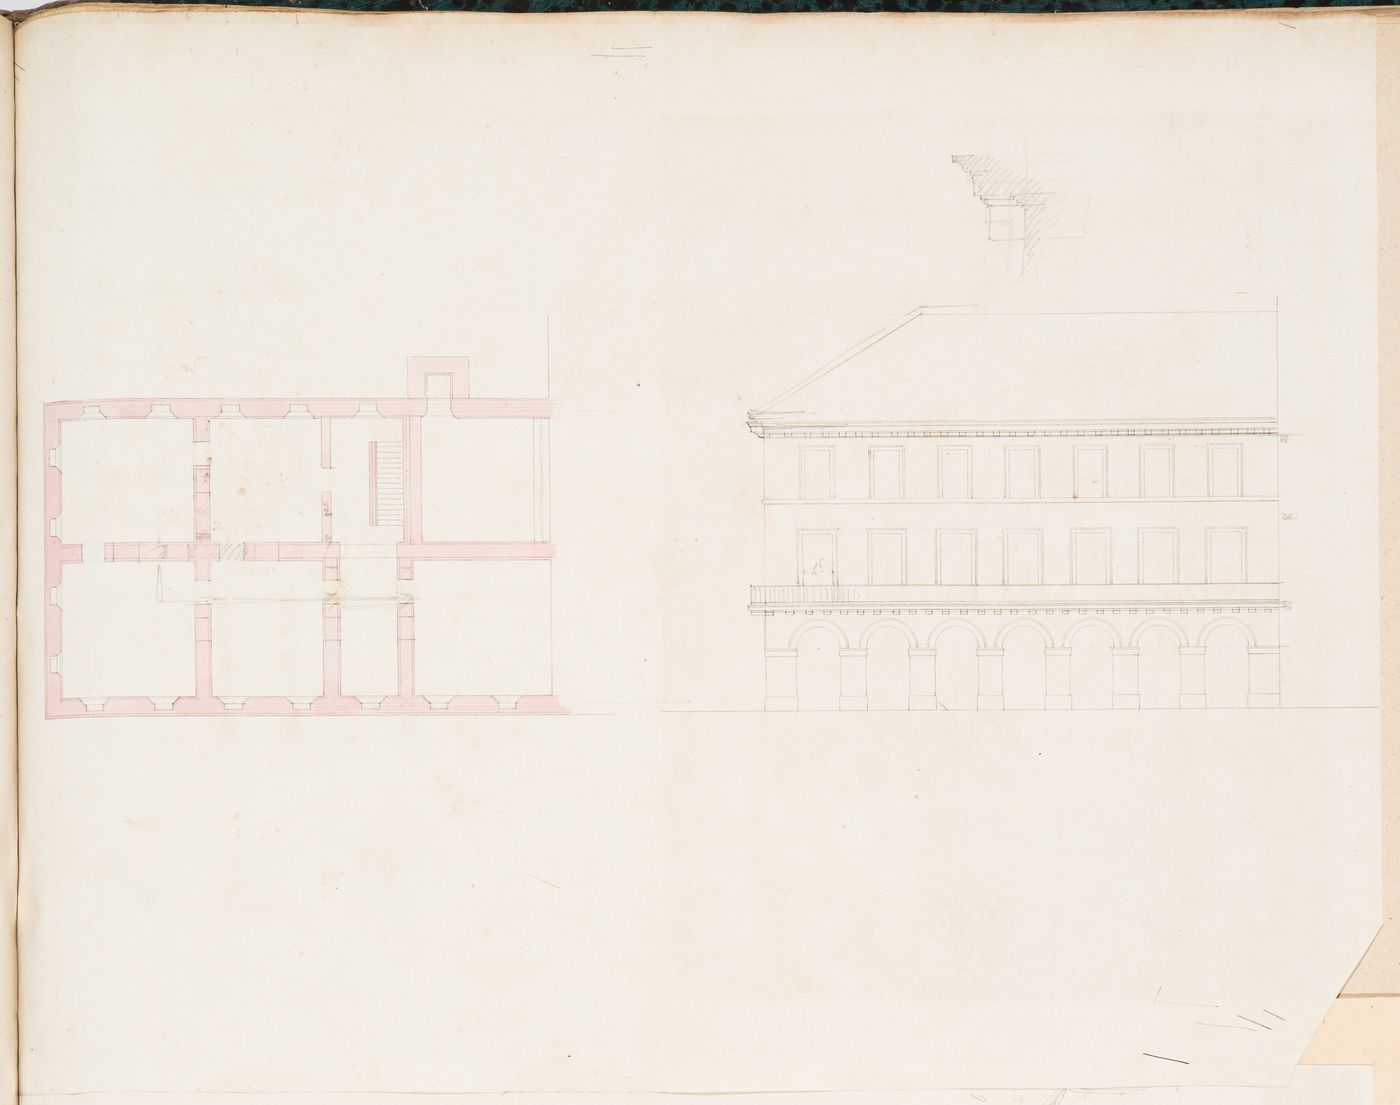 Partial plan and elevation, possibly for a hôtel for the de Lorgeril family in Rennes